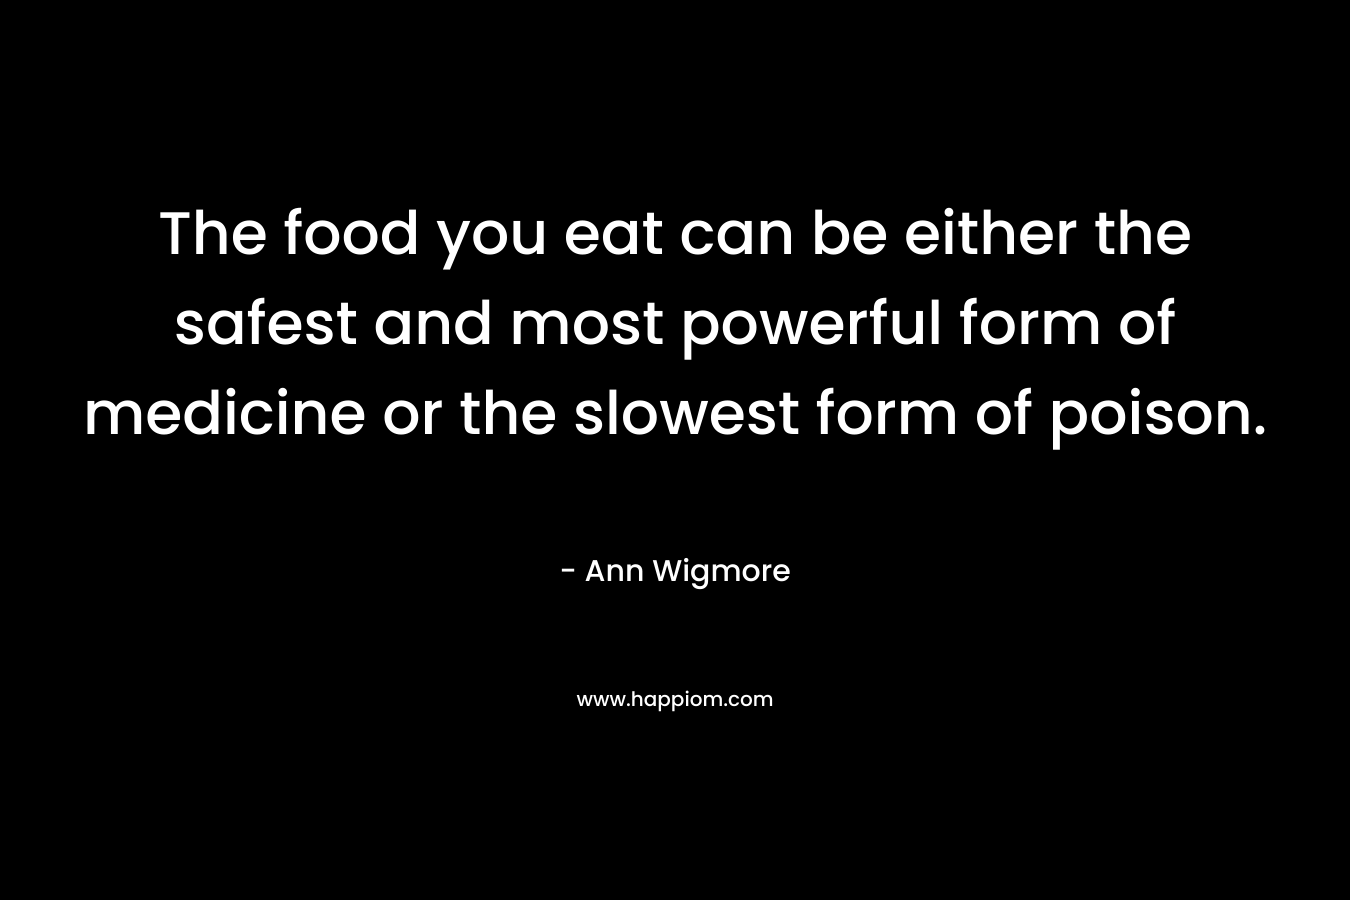 The food you eat can be either the safest and most powerful form of medicine or the slowest form of poison. – Ann Wigmore